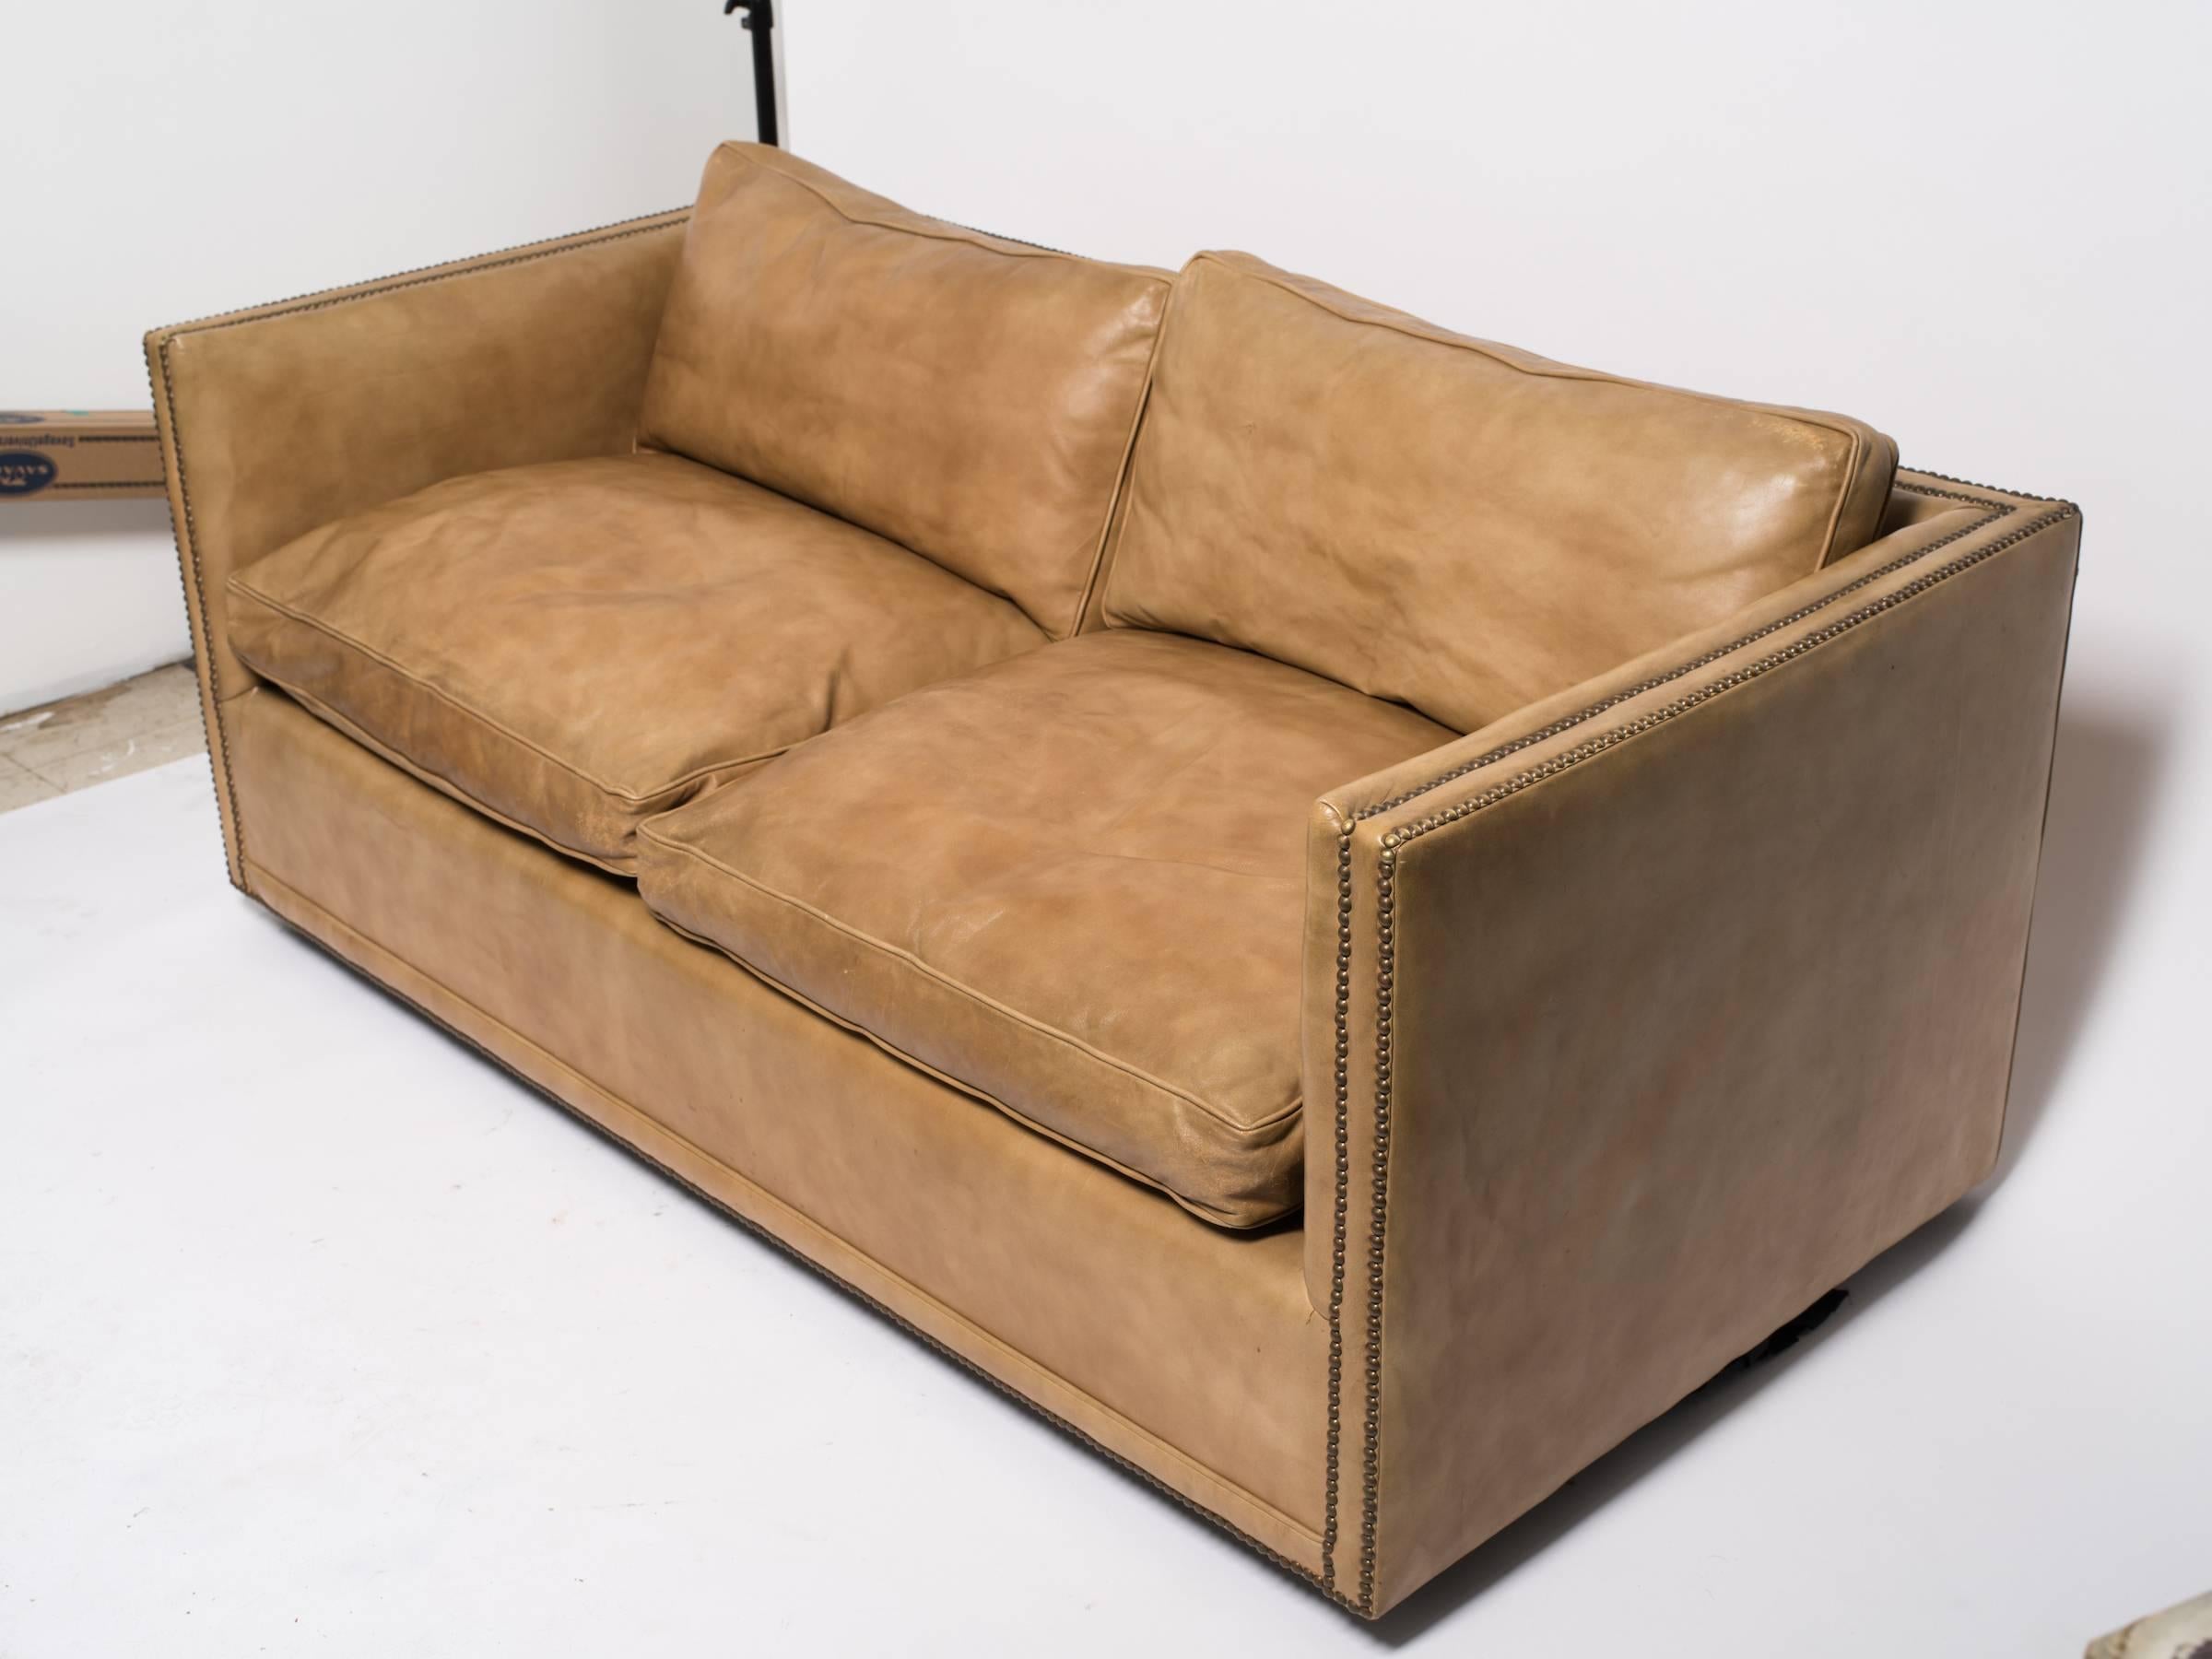 1970s down filled leather nailhead cube settee.

There is a small tear below the cushion that needs to be glued down.